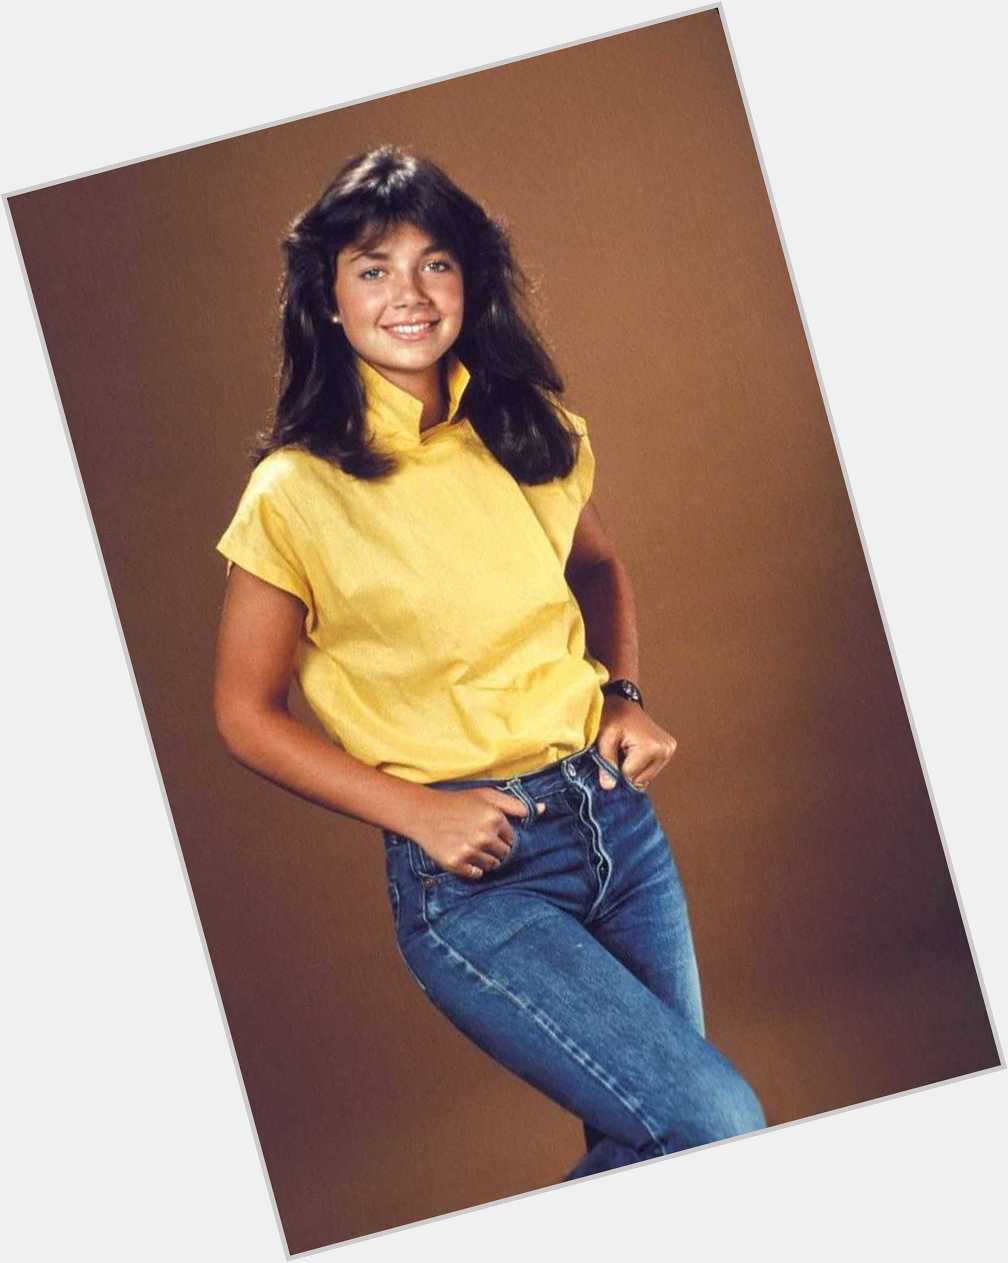 Happy birthday Mallory! Justine Bateman of Family Ties t.v. fame turns 54 today.  